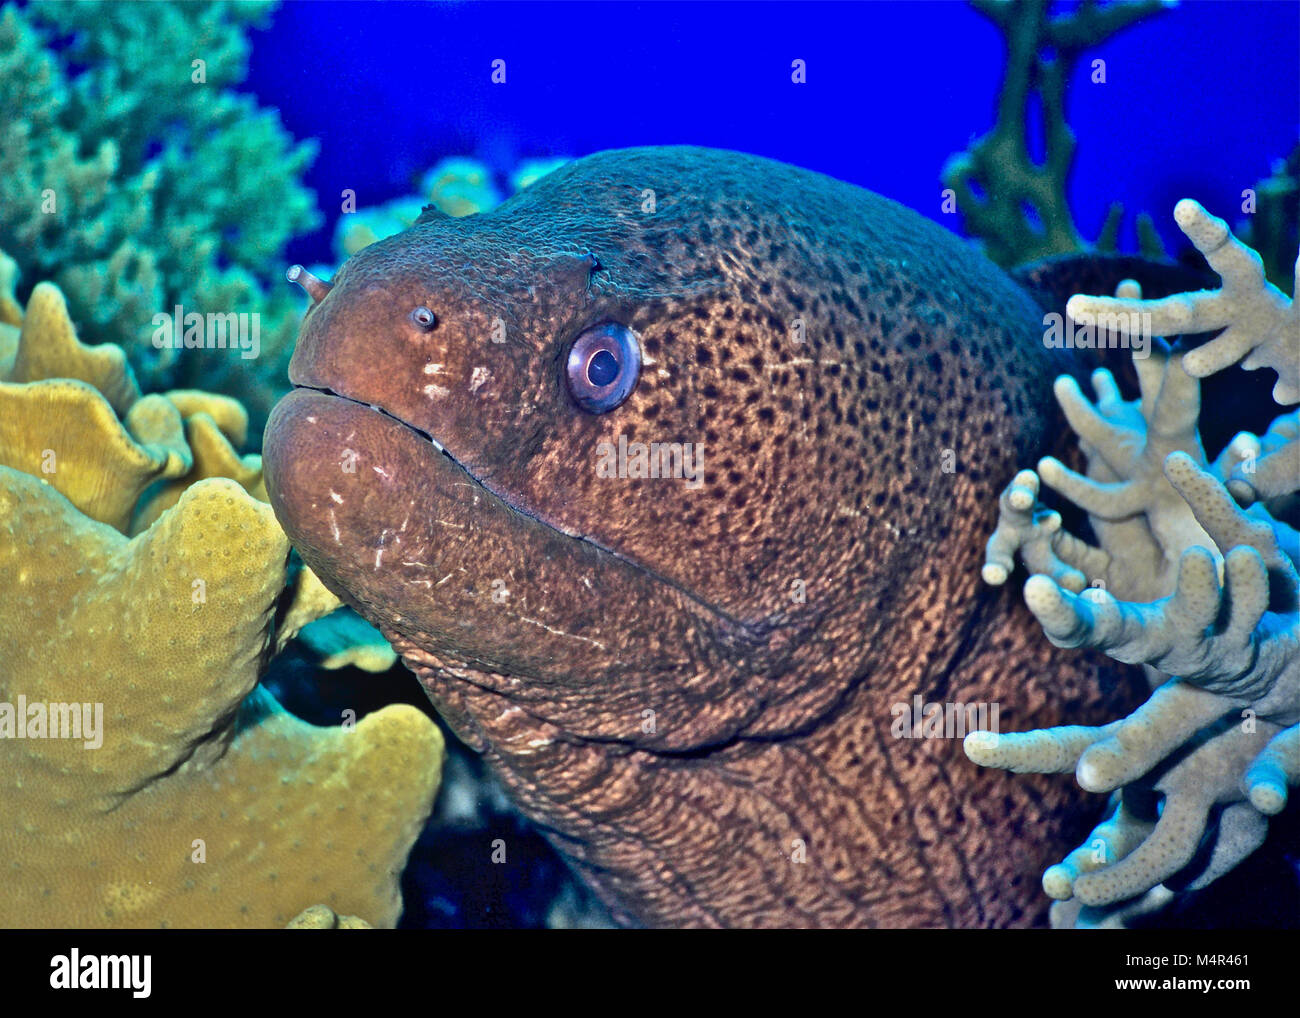 Giant moray eels (Gymnothorax javanicus) can be three metres long and make an impressive sight when they are free-swimming, which is usually at night as they are nocturnal feeders. During the day, the eel is usually encountered peeping out from the shelter of a coral reef crevice, in which the bulk of its lengthy body is safely ensconced. A confident apex predator, it can often be approached for a close-up photograph, as in this instance. However, this should be done with stealth and care so as not to alarm the animal. Imprudent divers who are less than careful can get bitten! Egyptian Red Sea Stock Photo